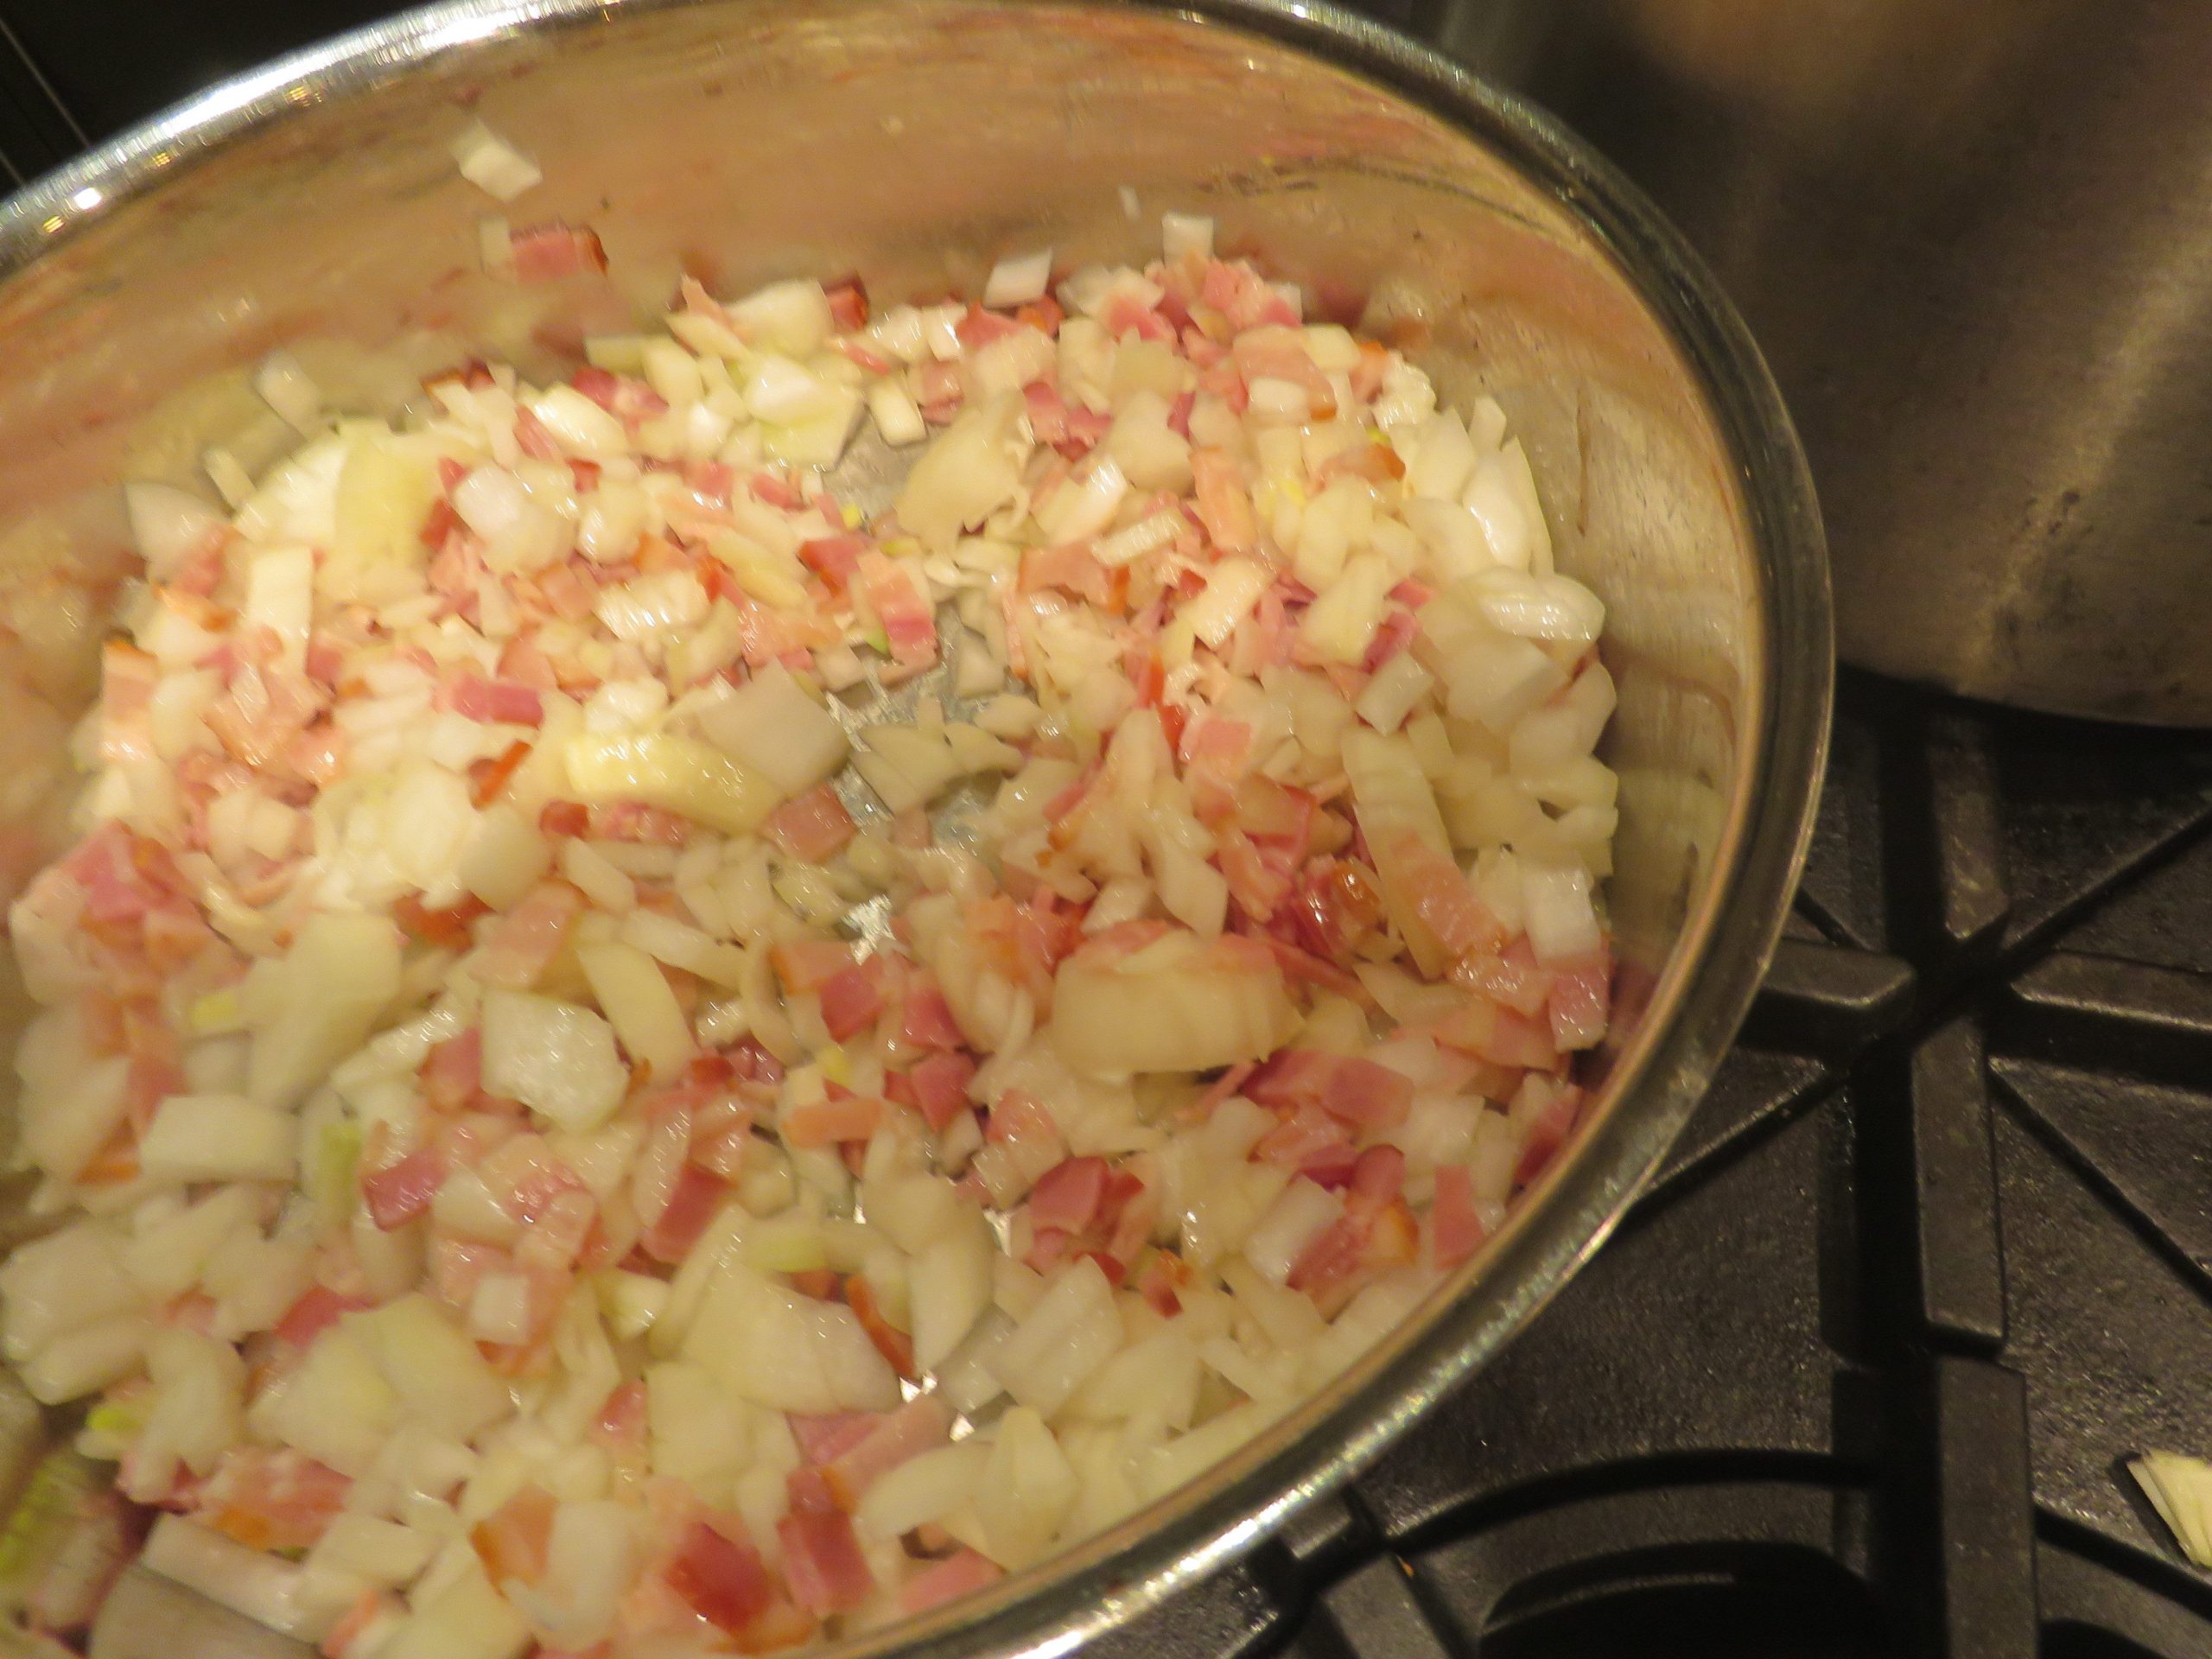 Recipes - 30 minute meals and organic recipes from Nutrafarms - Onions Garlic and Smoked Bacon